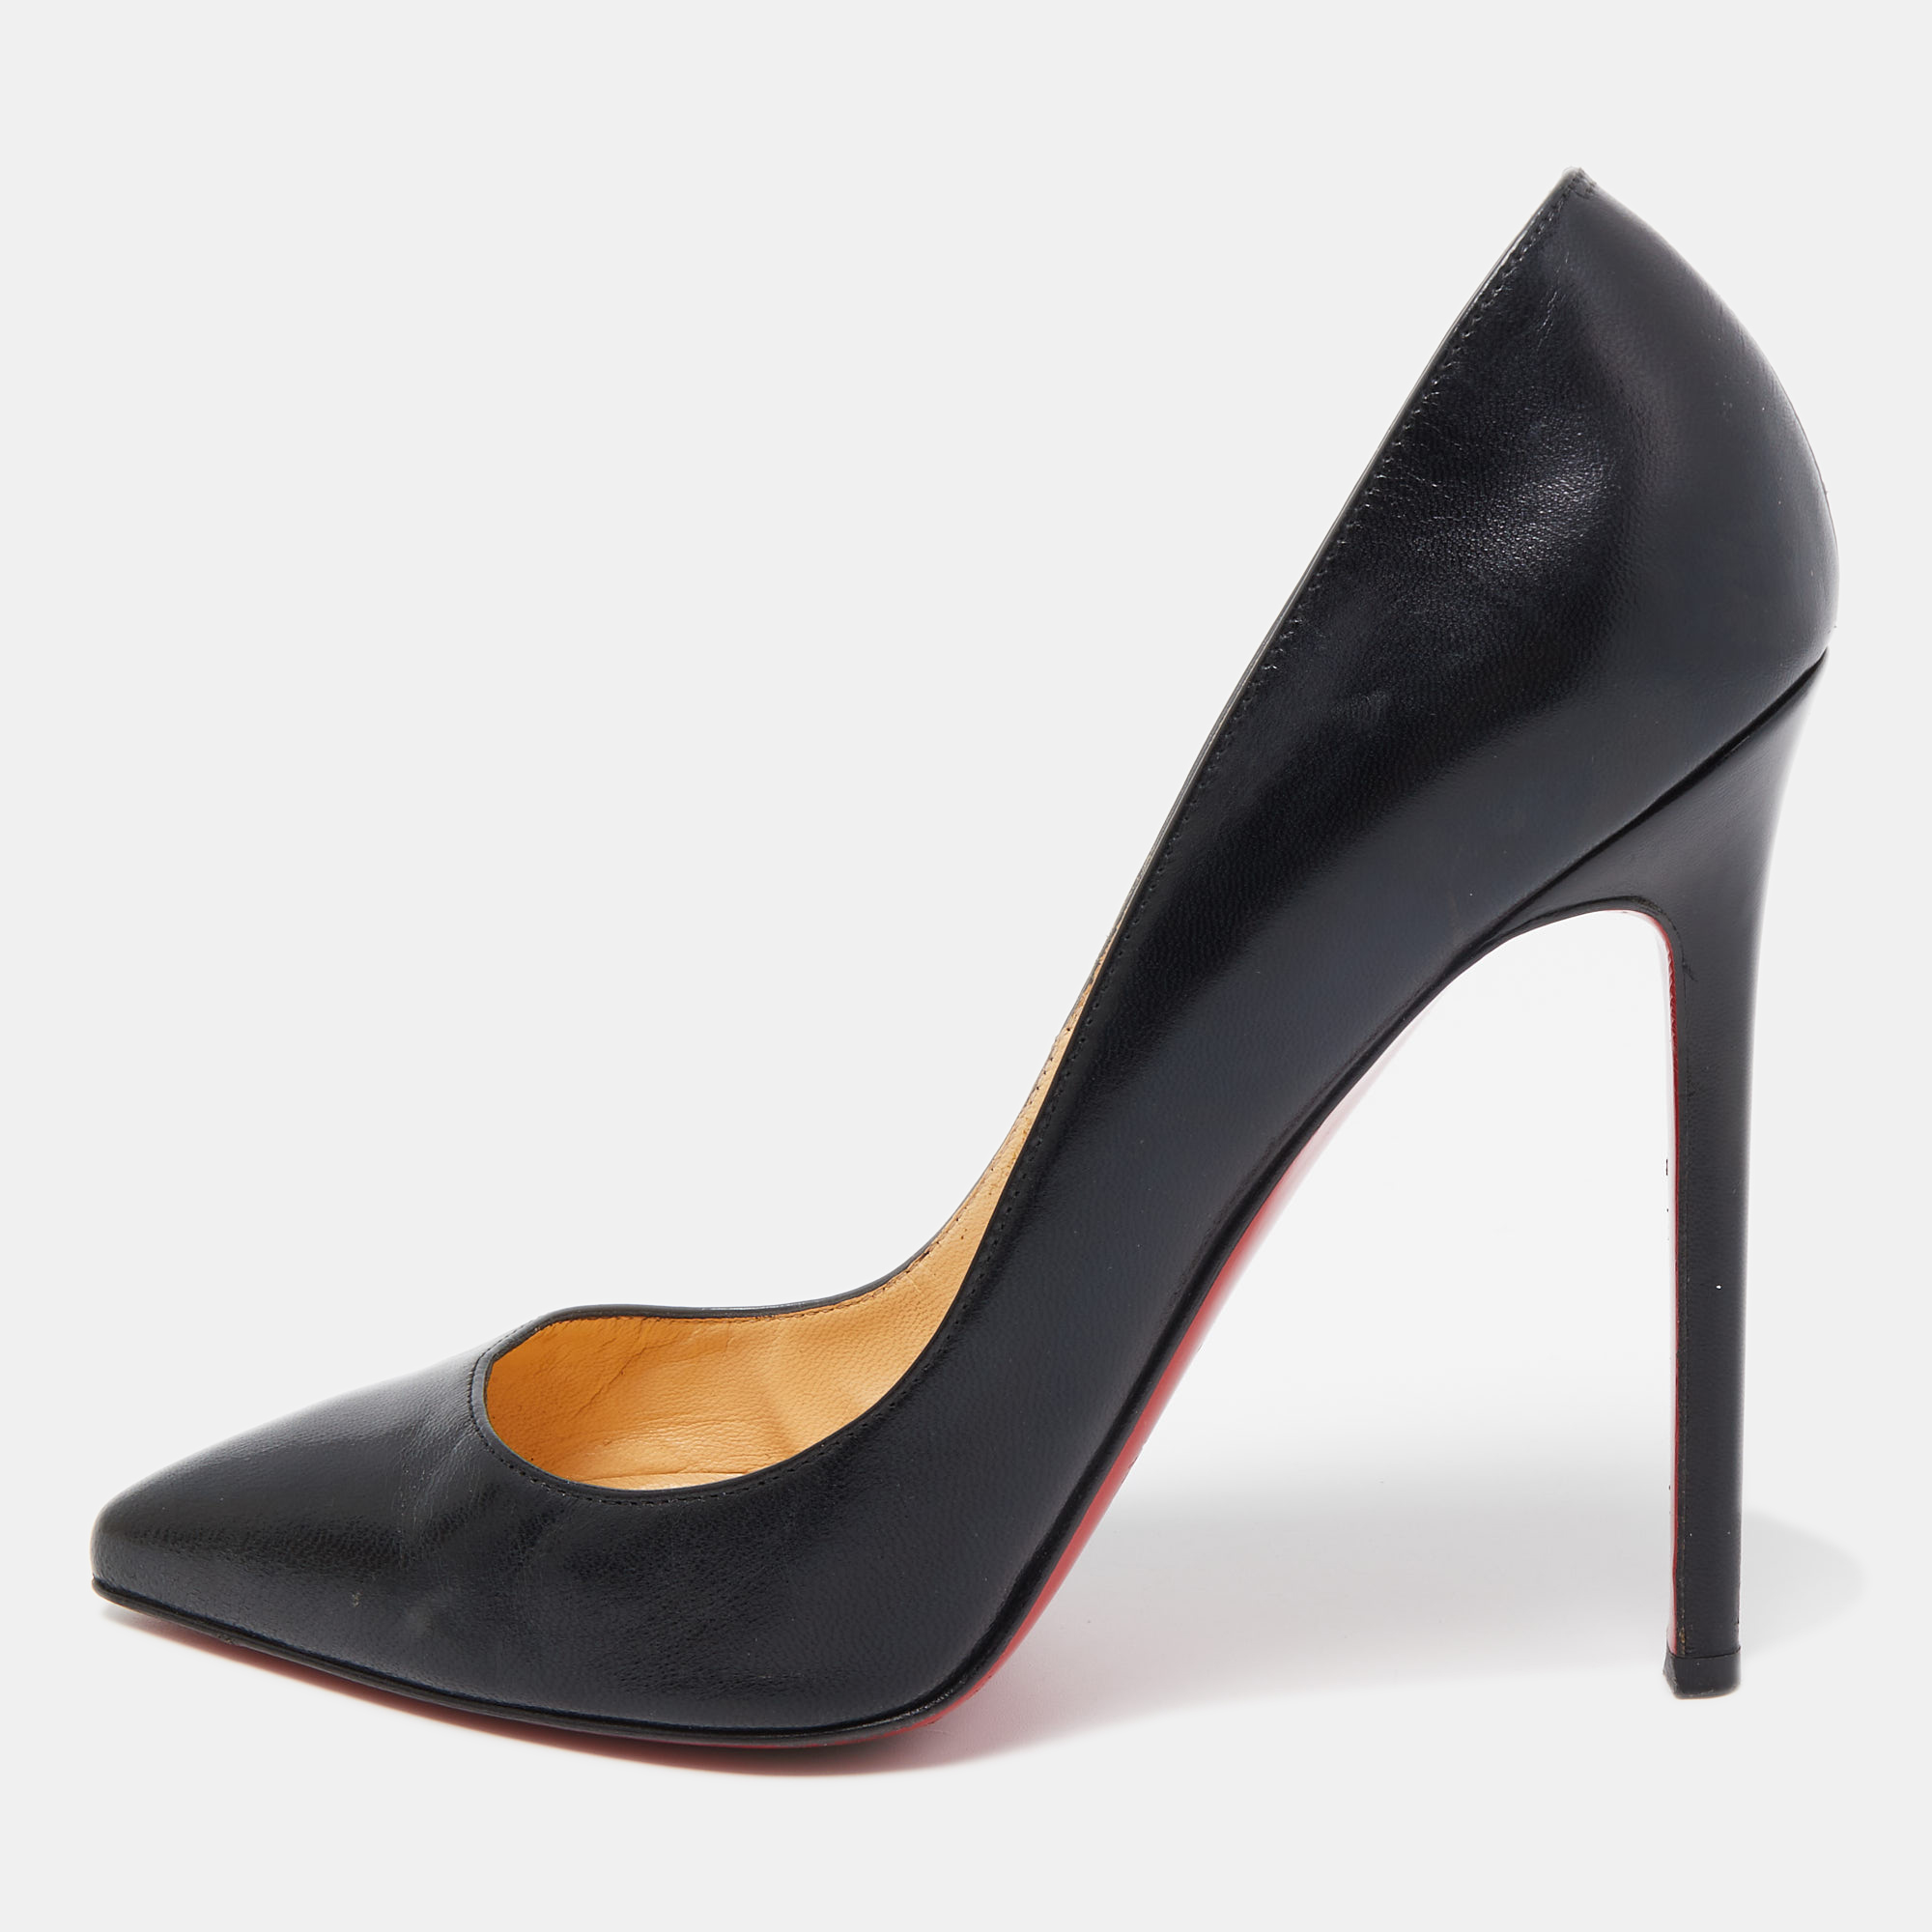 Christian Louboutin Black Leather Pigalle Pumps Size 38.5